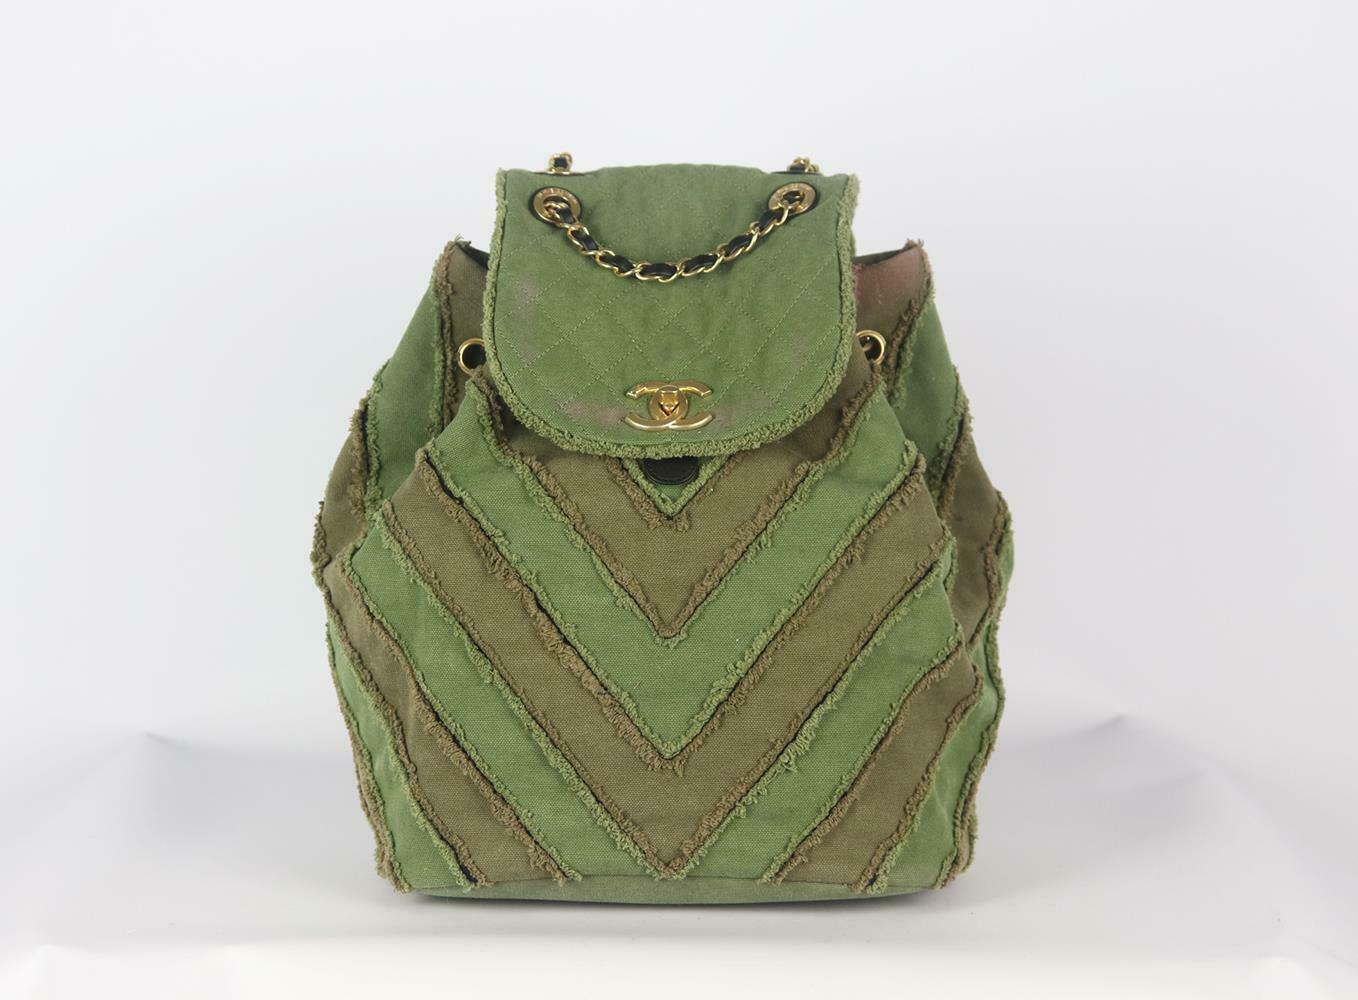 Made in Italy, this beautiful Chanel Coco Cuba Chevron backpack has been made from khaki canvas and black leather exterior with pink fabric interior, this piece is decorated with Chanel's logo in antiqued-gold on the front and finished with chain